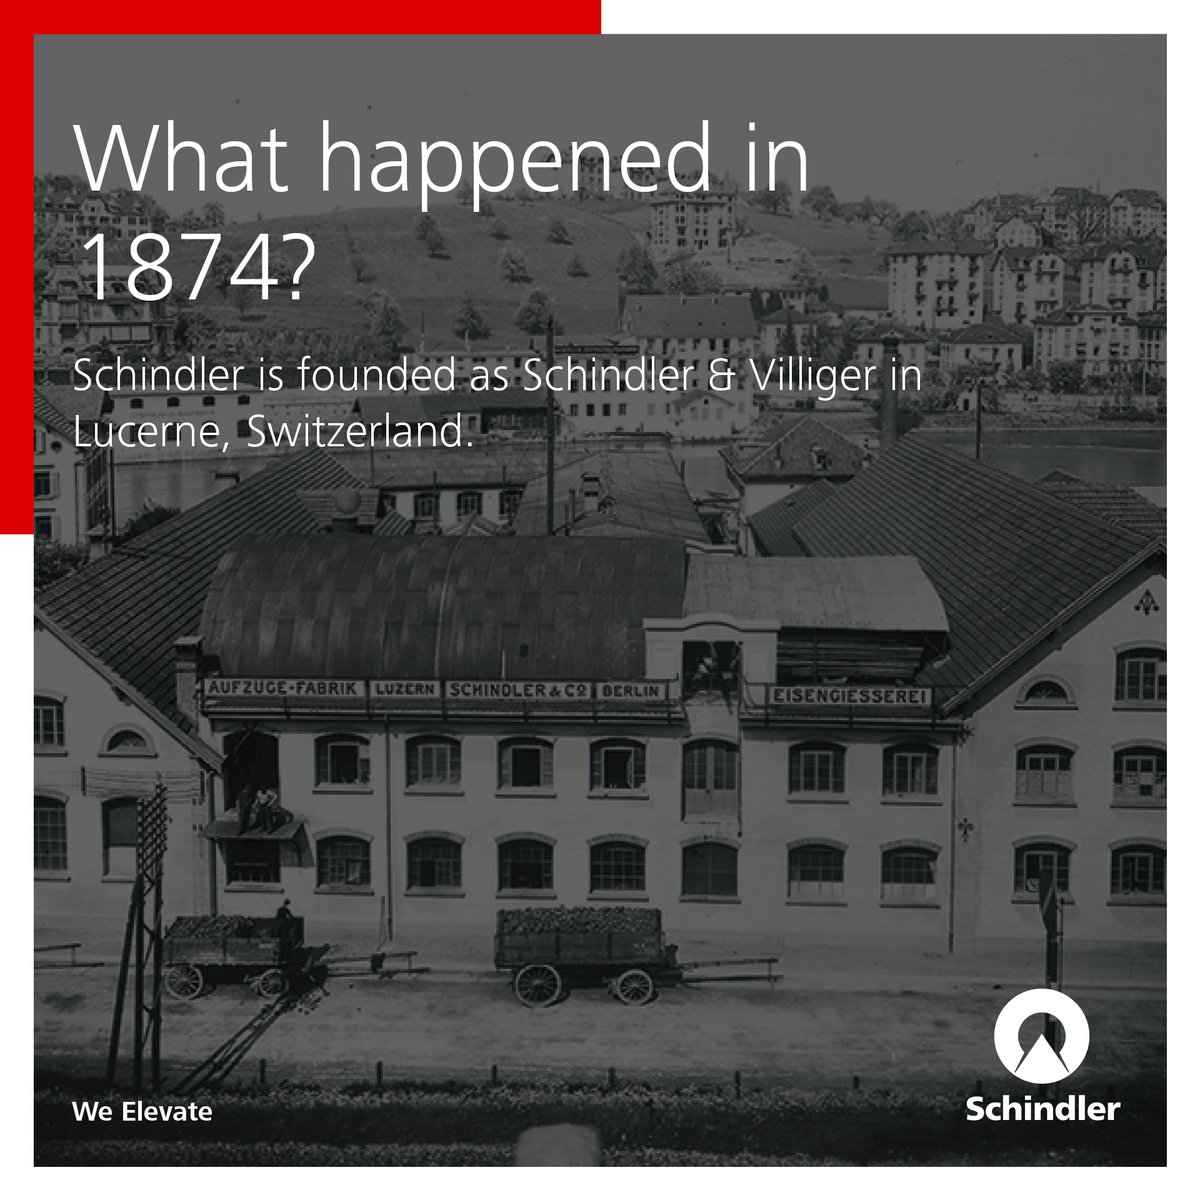 1874 was a very special year - and not just for us! Find out what else happened in the year Schindler was founded.

#WeElevate #150years #Schindler